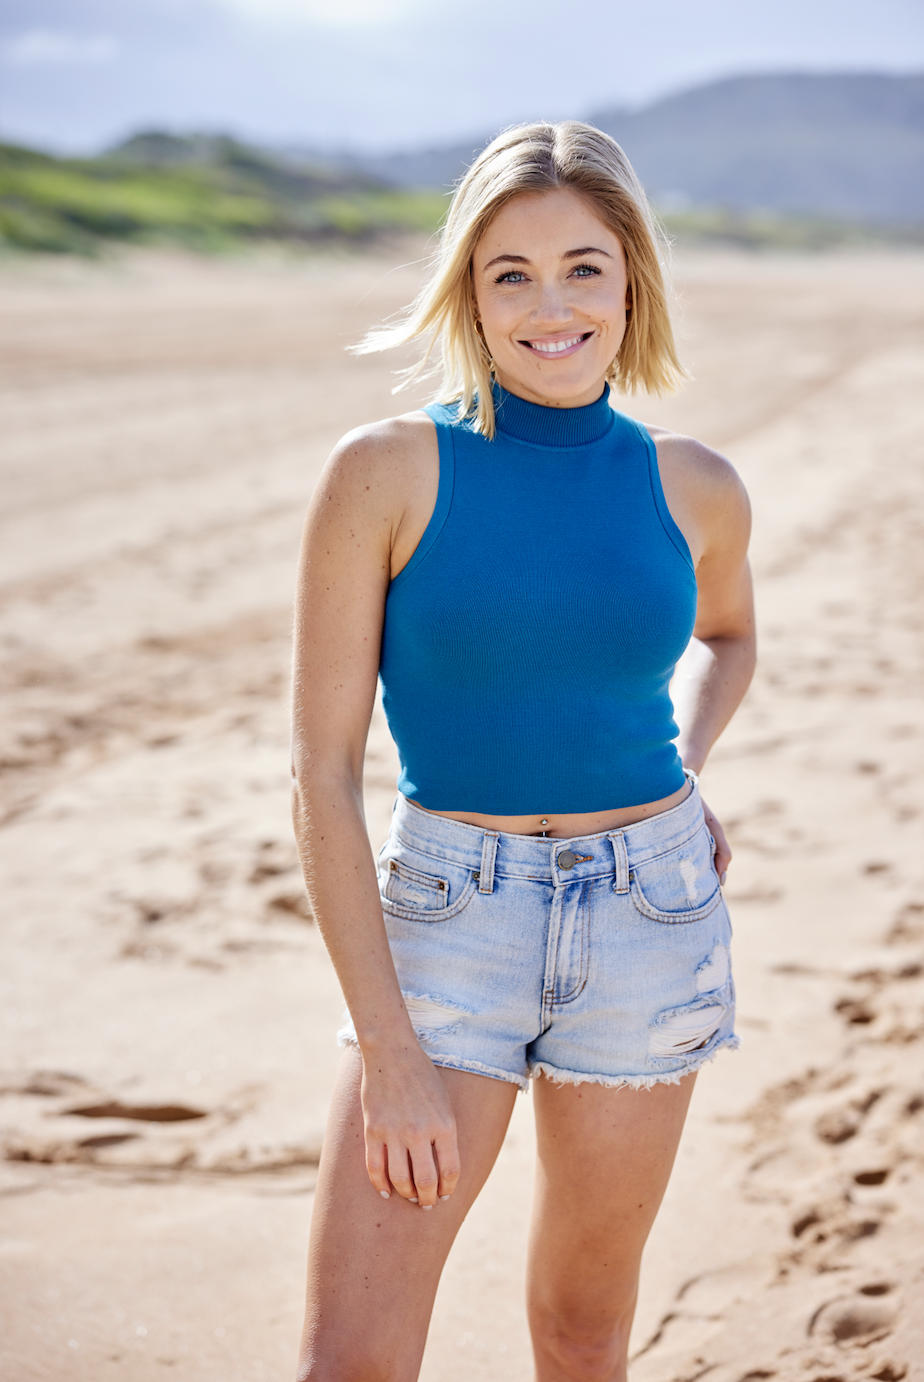 Home and Away spoilers - first look at two new characters in mystery story